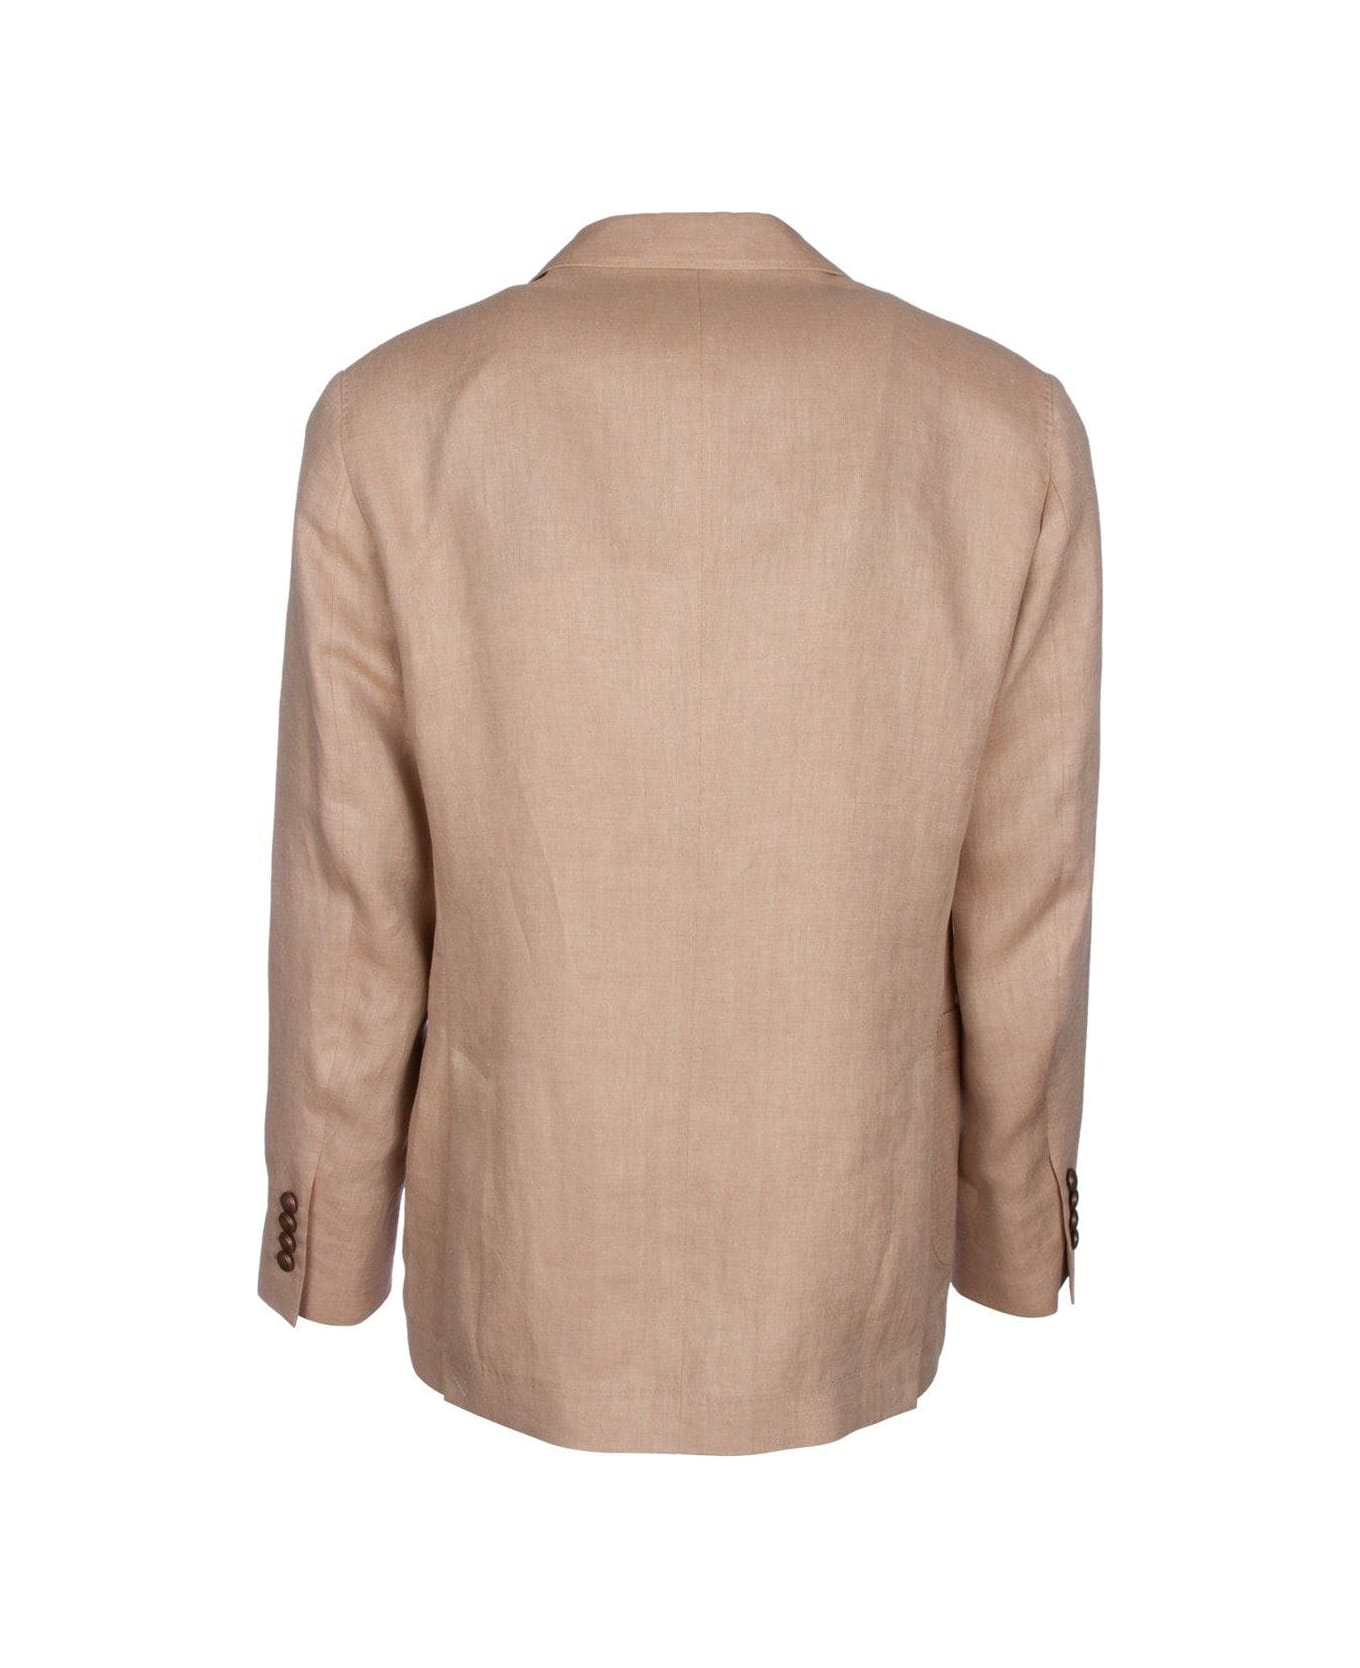 Brunello Cucinelli Double-breasted Long-sleeved Blazer - BROWN